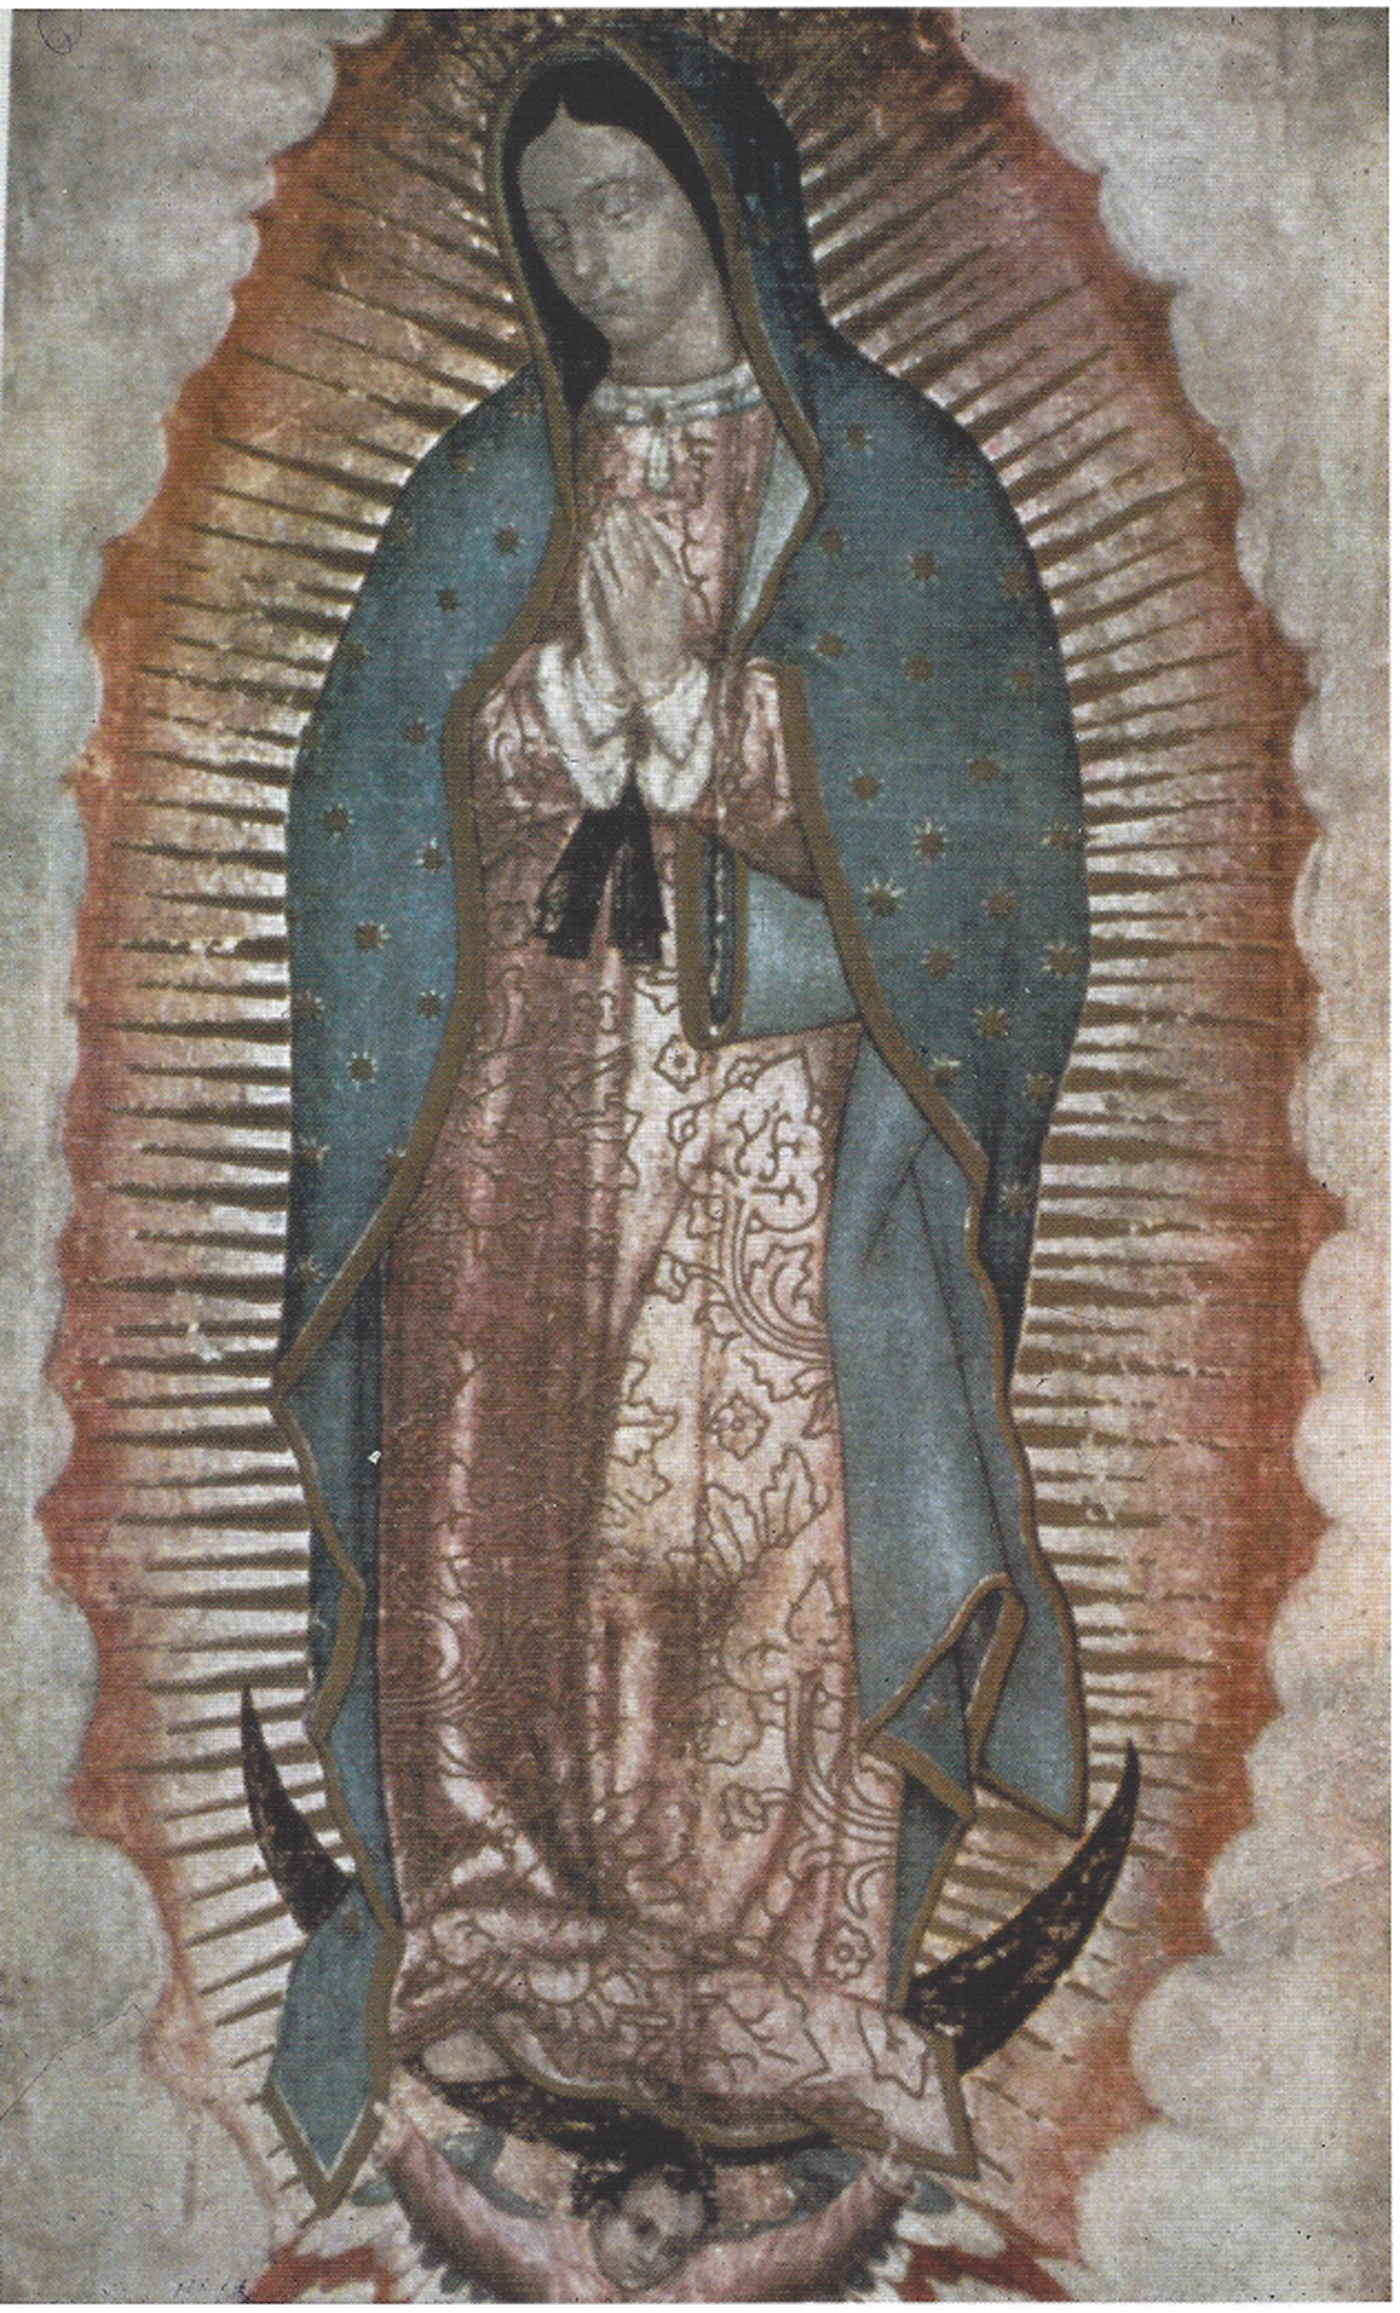 Our Lady of Guadalupe: Experience of Cuauhtlatohuac